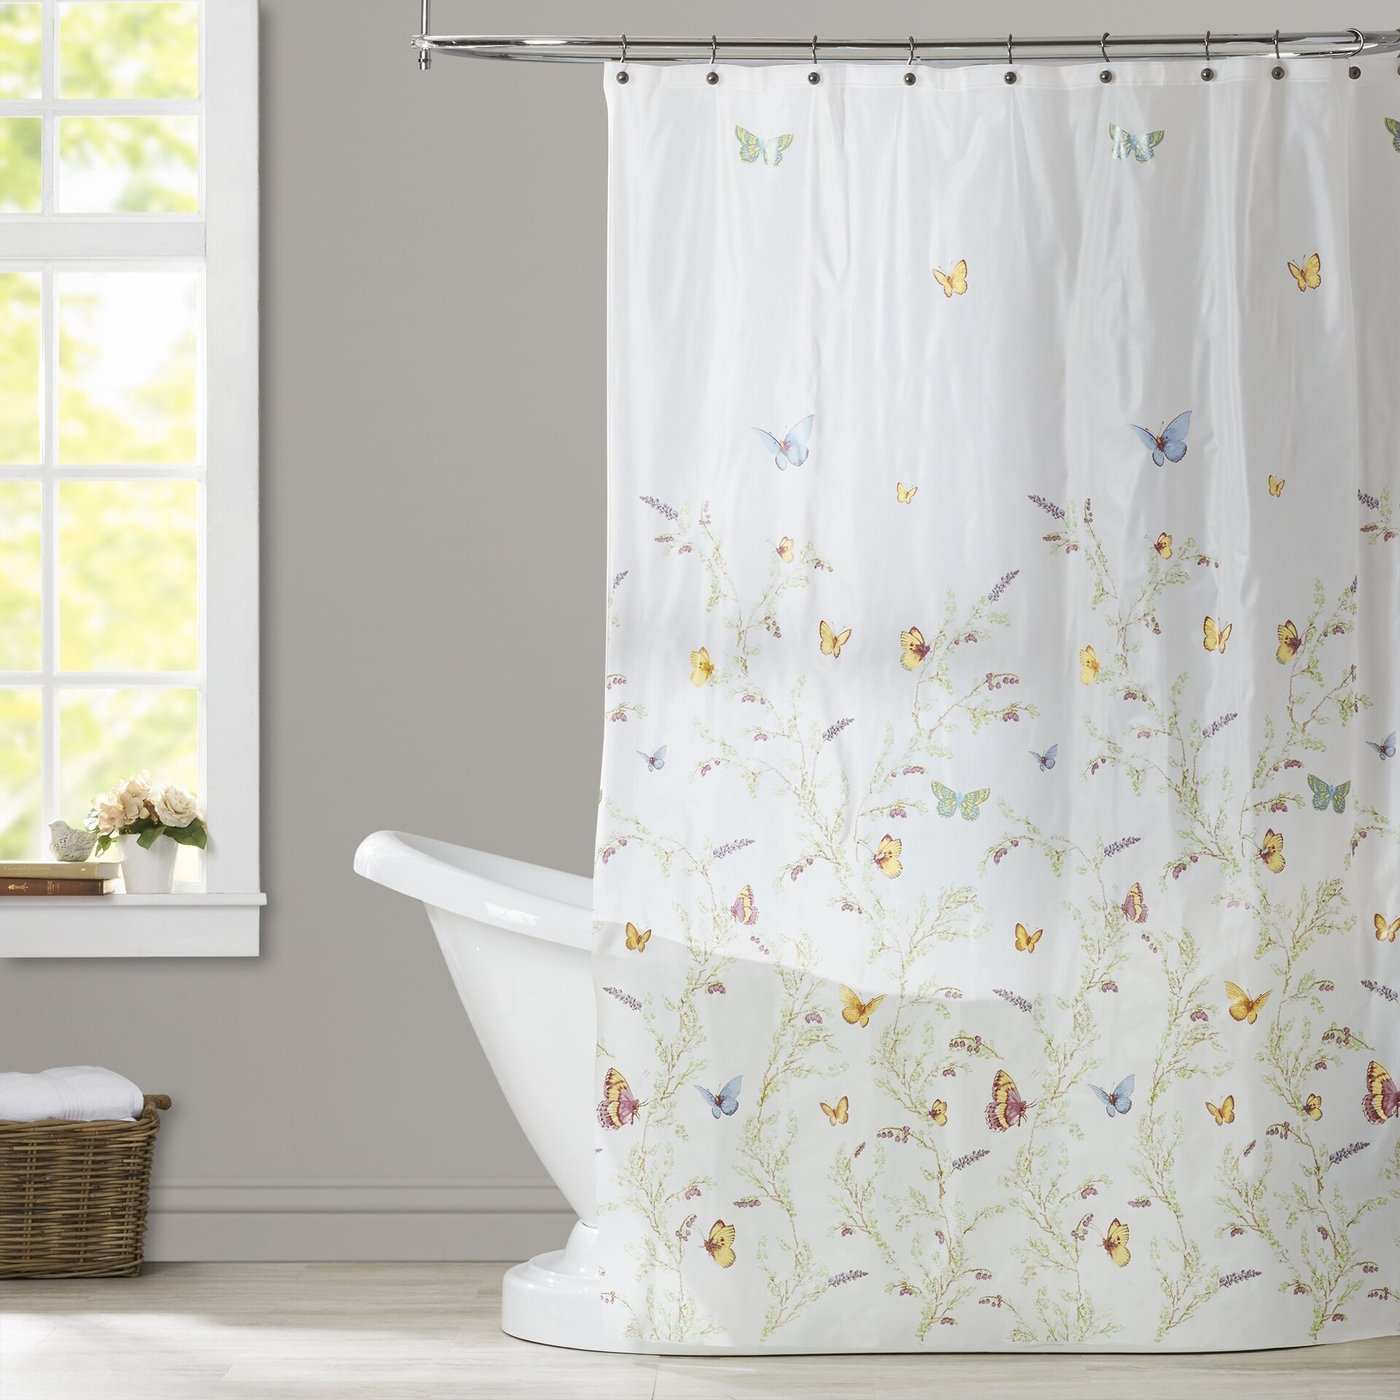 5 Expert Tips To Choose A Shower Curtain - VisualHunt